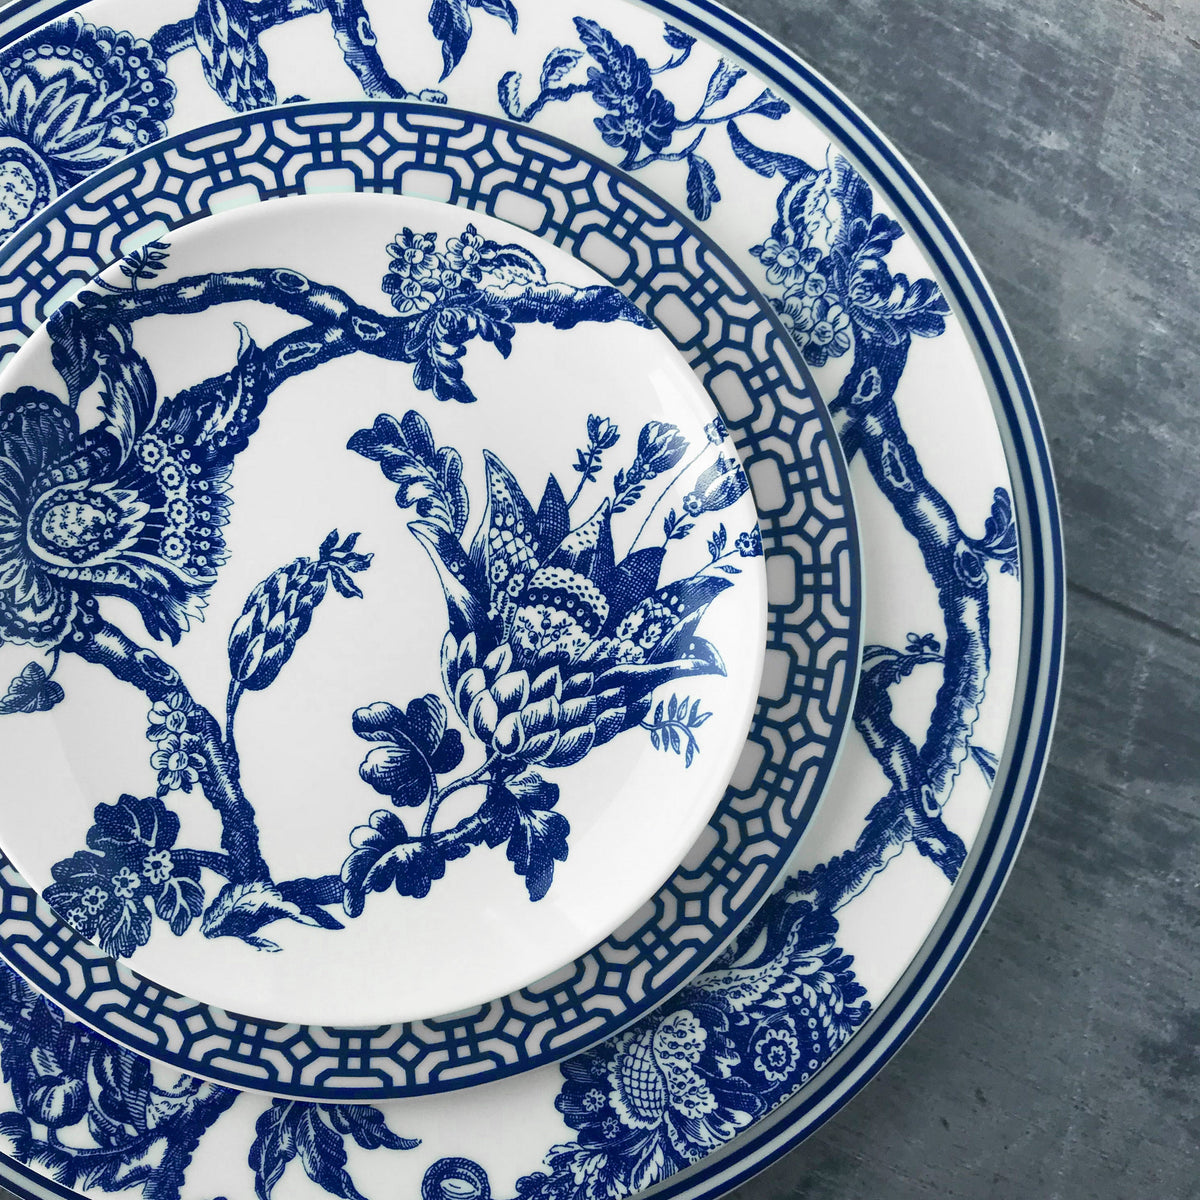 A Newport Blue Charger Plate by Caskata Artisanal Home, a blue and white porcelain dinnerware with a floral pattern.